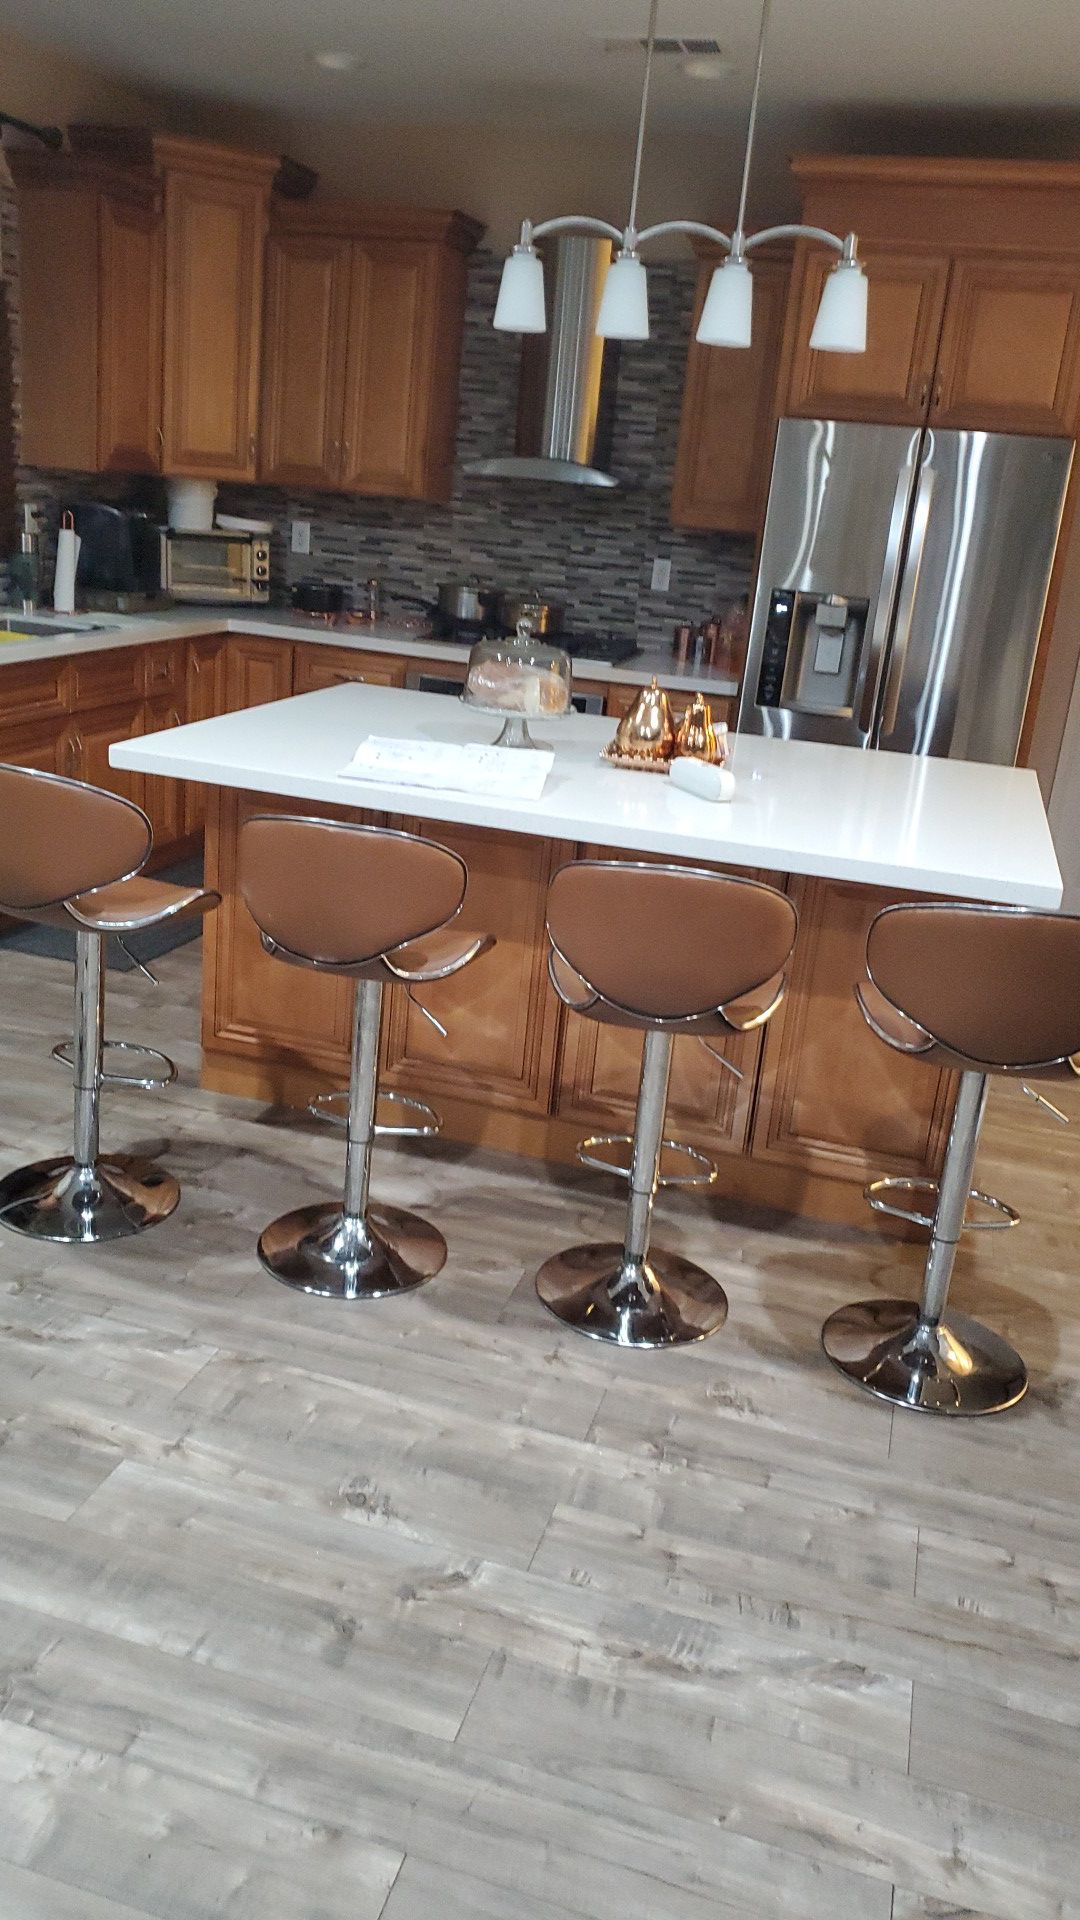 4 stools chairs good condition high adjustable